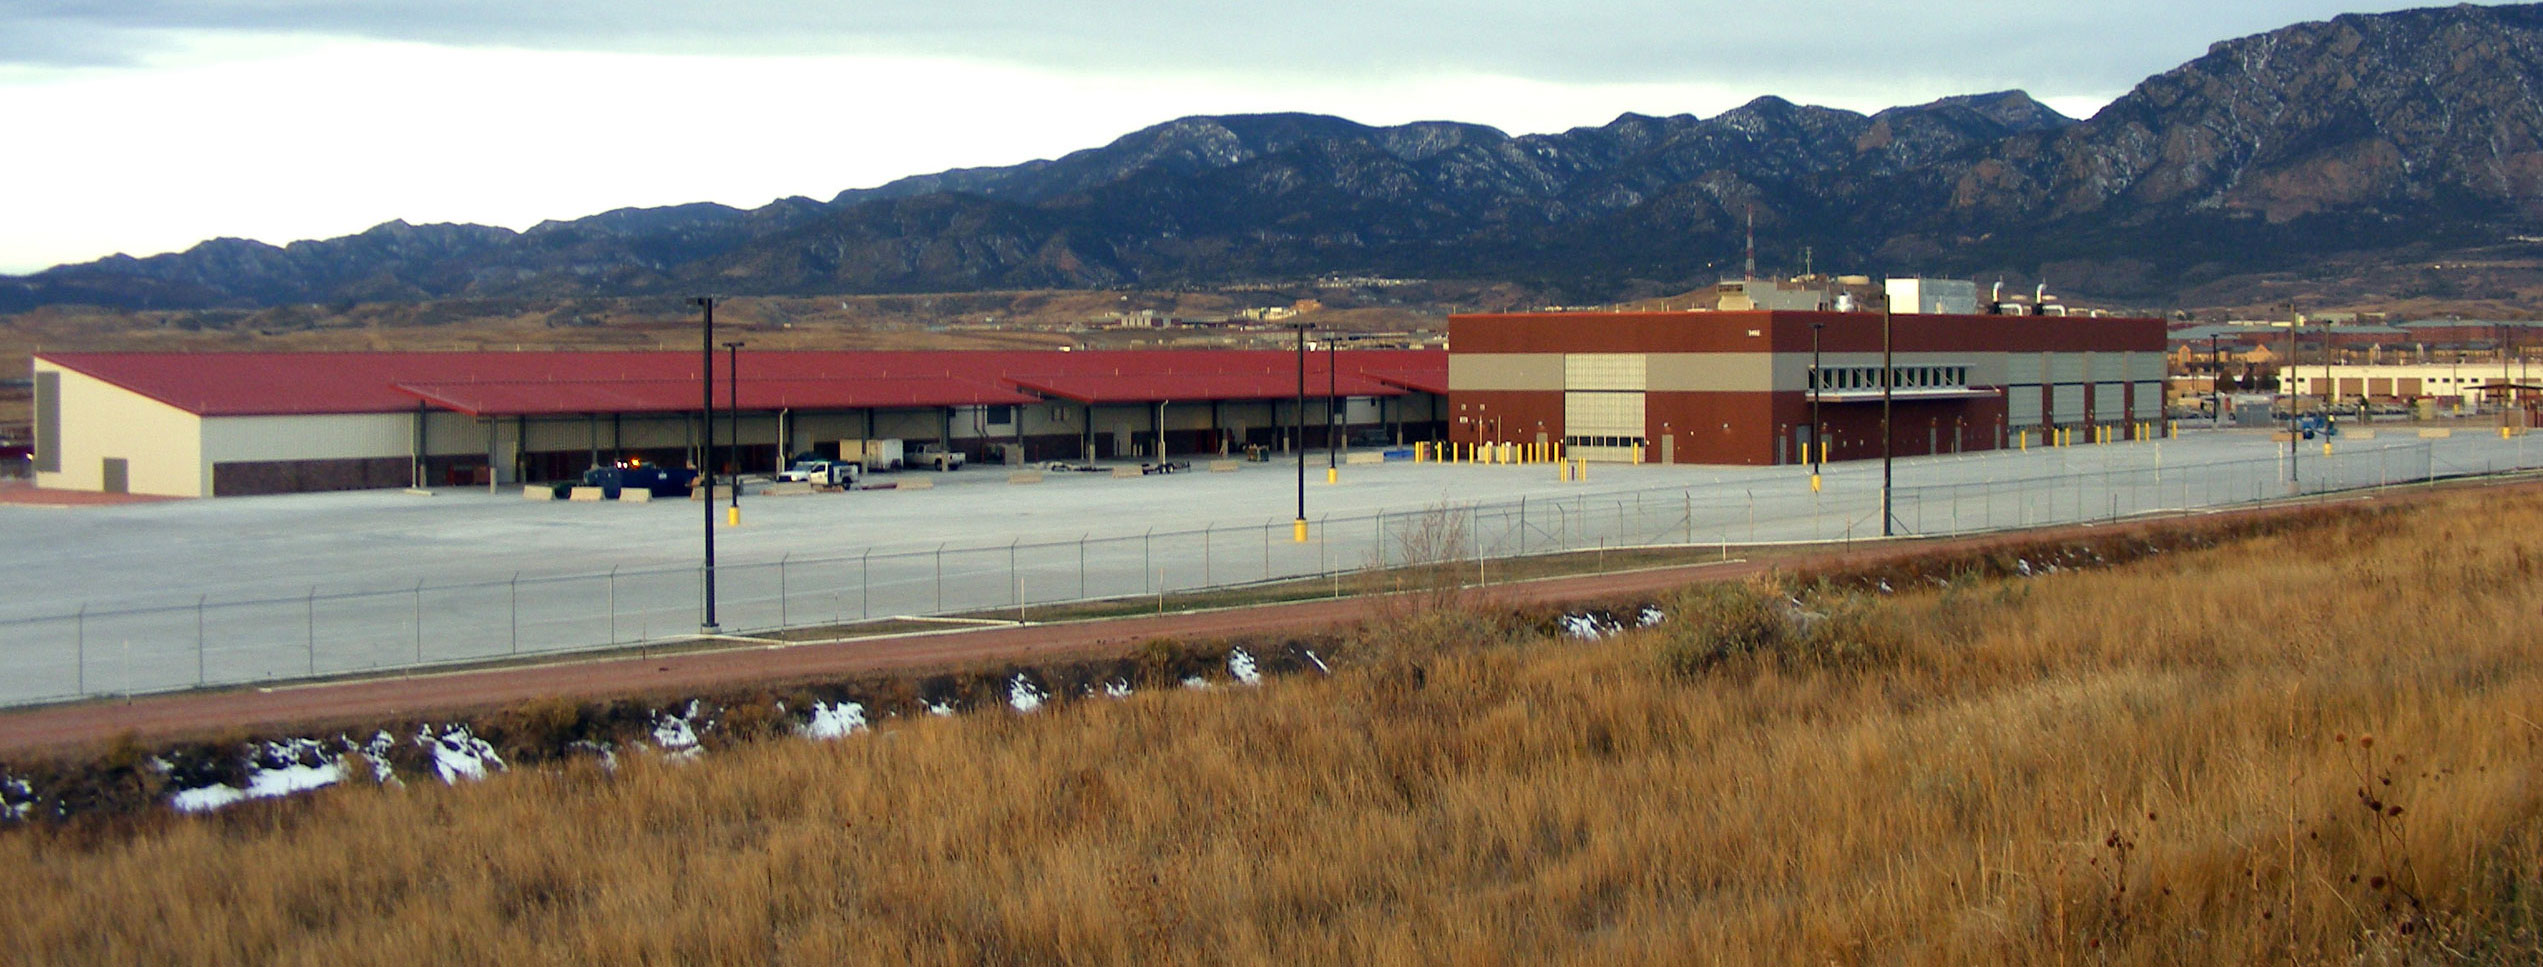 Fort Carson Operations Facility